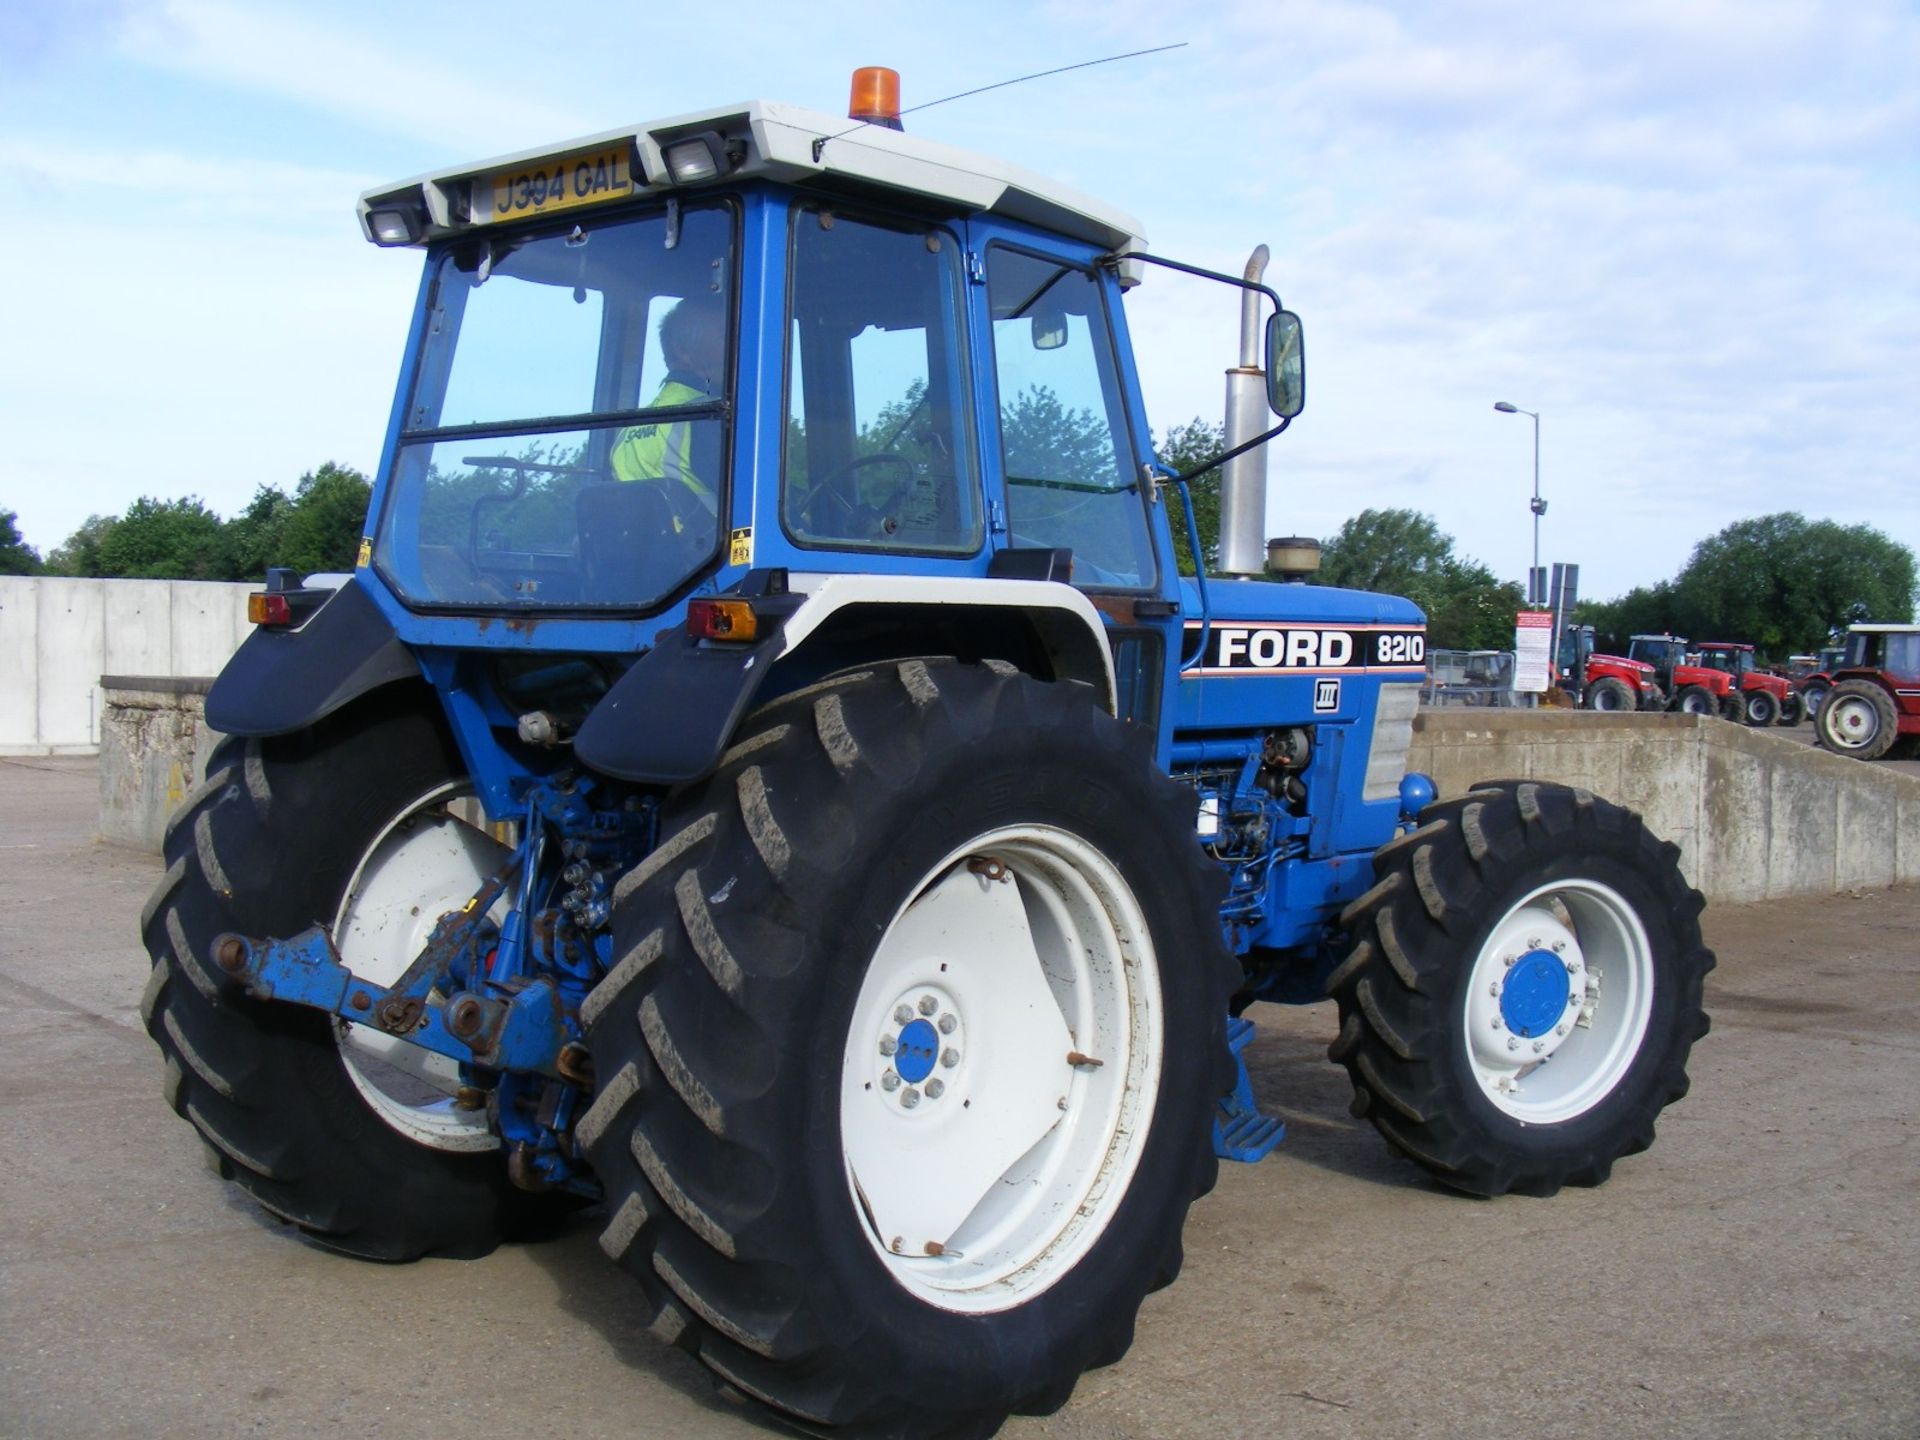 1991 Ford 8210 4wd Tractor - Image 8 of 10